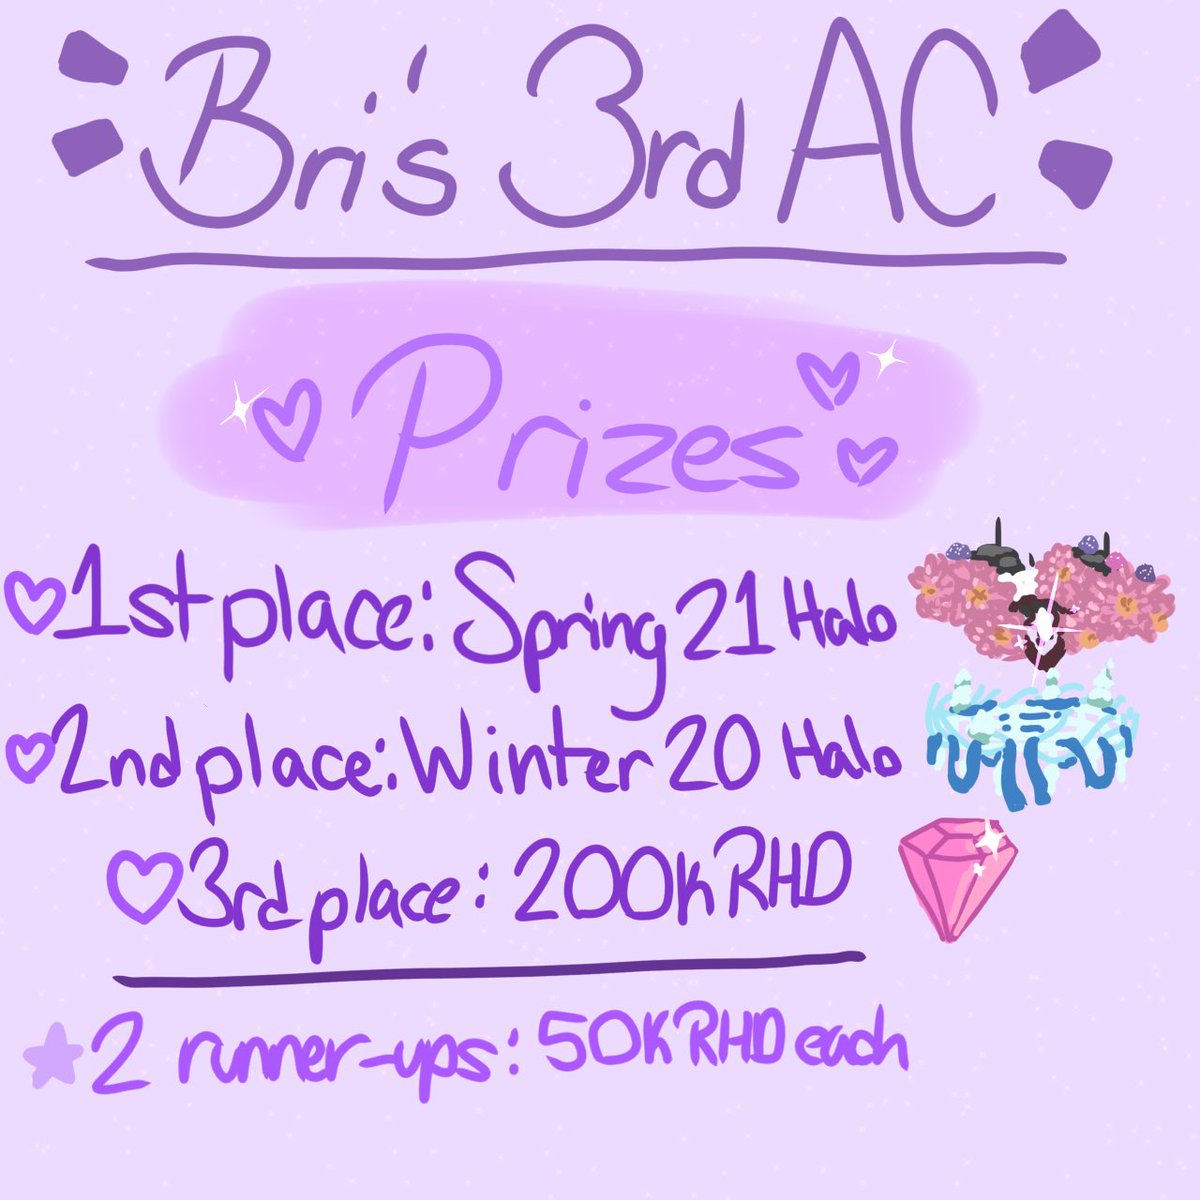 ~💜Bri’s Halo Art Contest💜~ I’m happy to announce that I will be hosting my third ever art contest!! All info is in the pictures below or in the thread! End date: May 28th, 2022